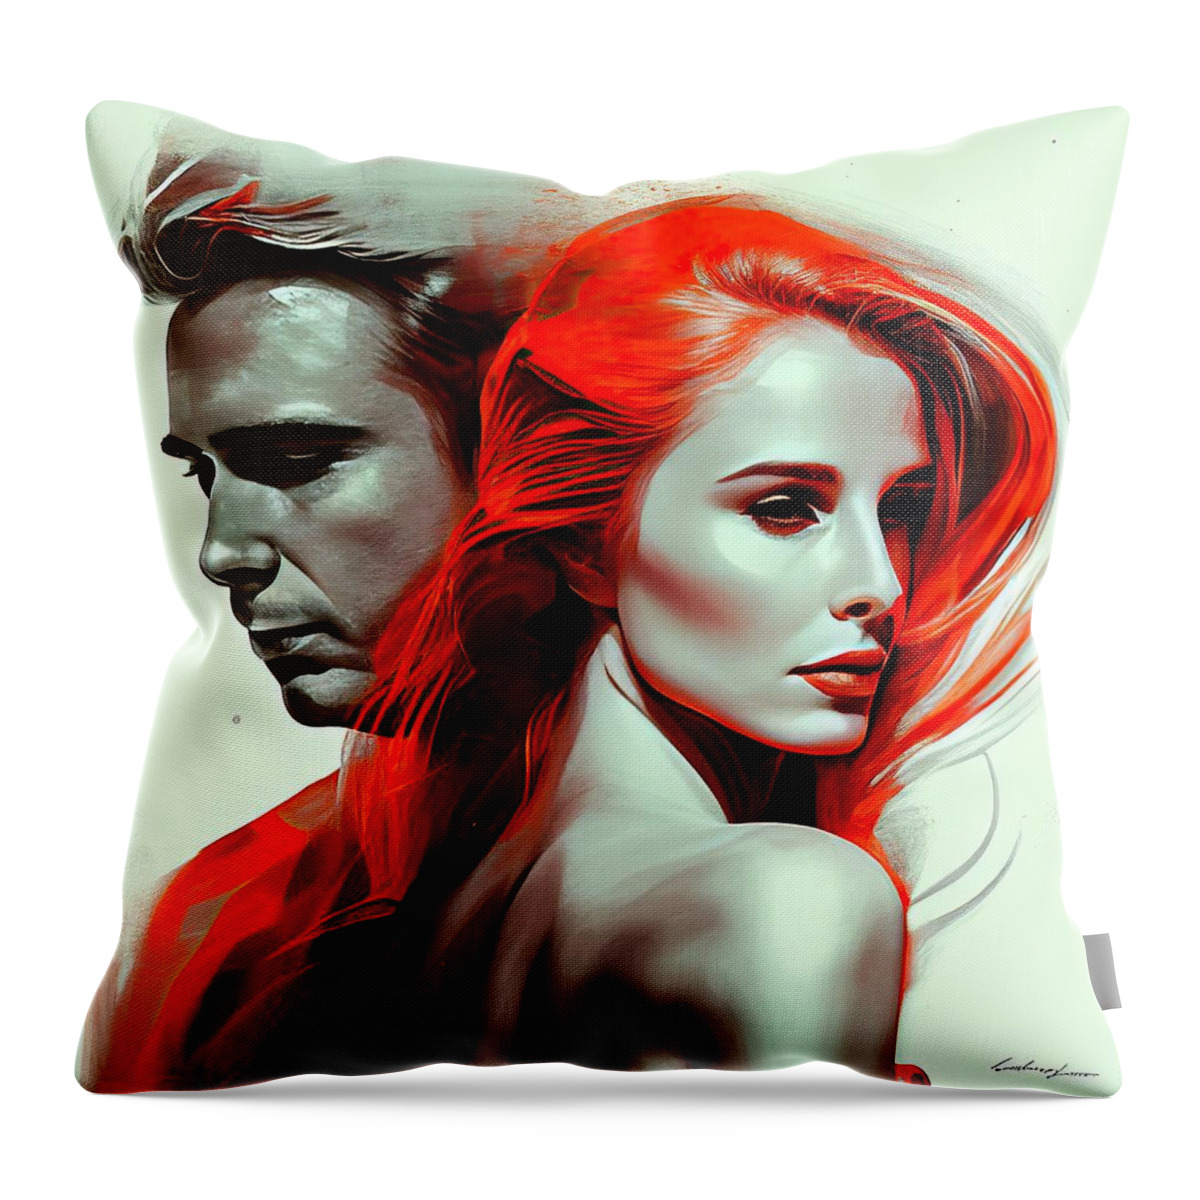 Man Throw Pillow featuring the painting Attractive Couple No. 2 by My Head Cinema